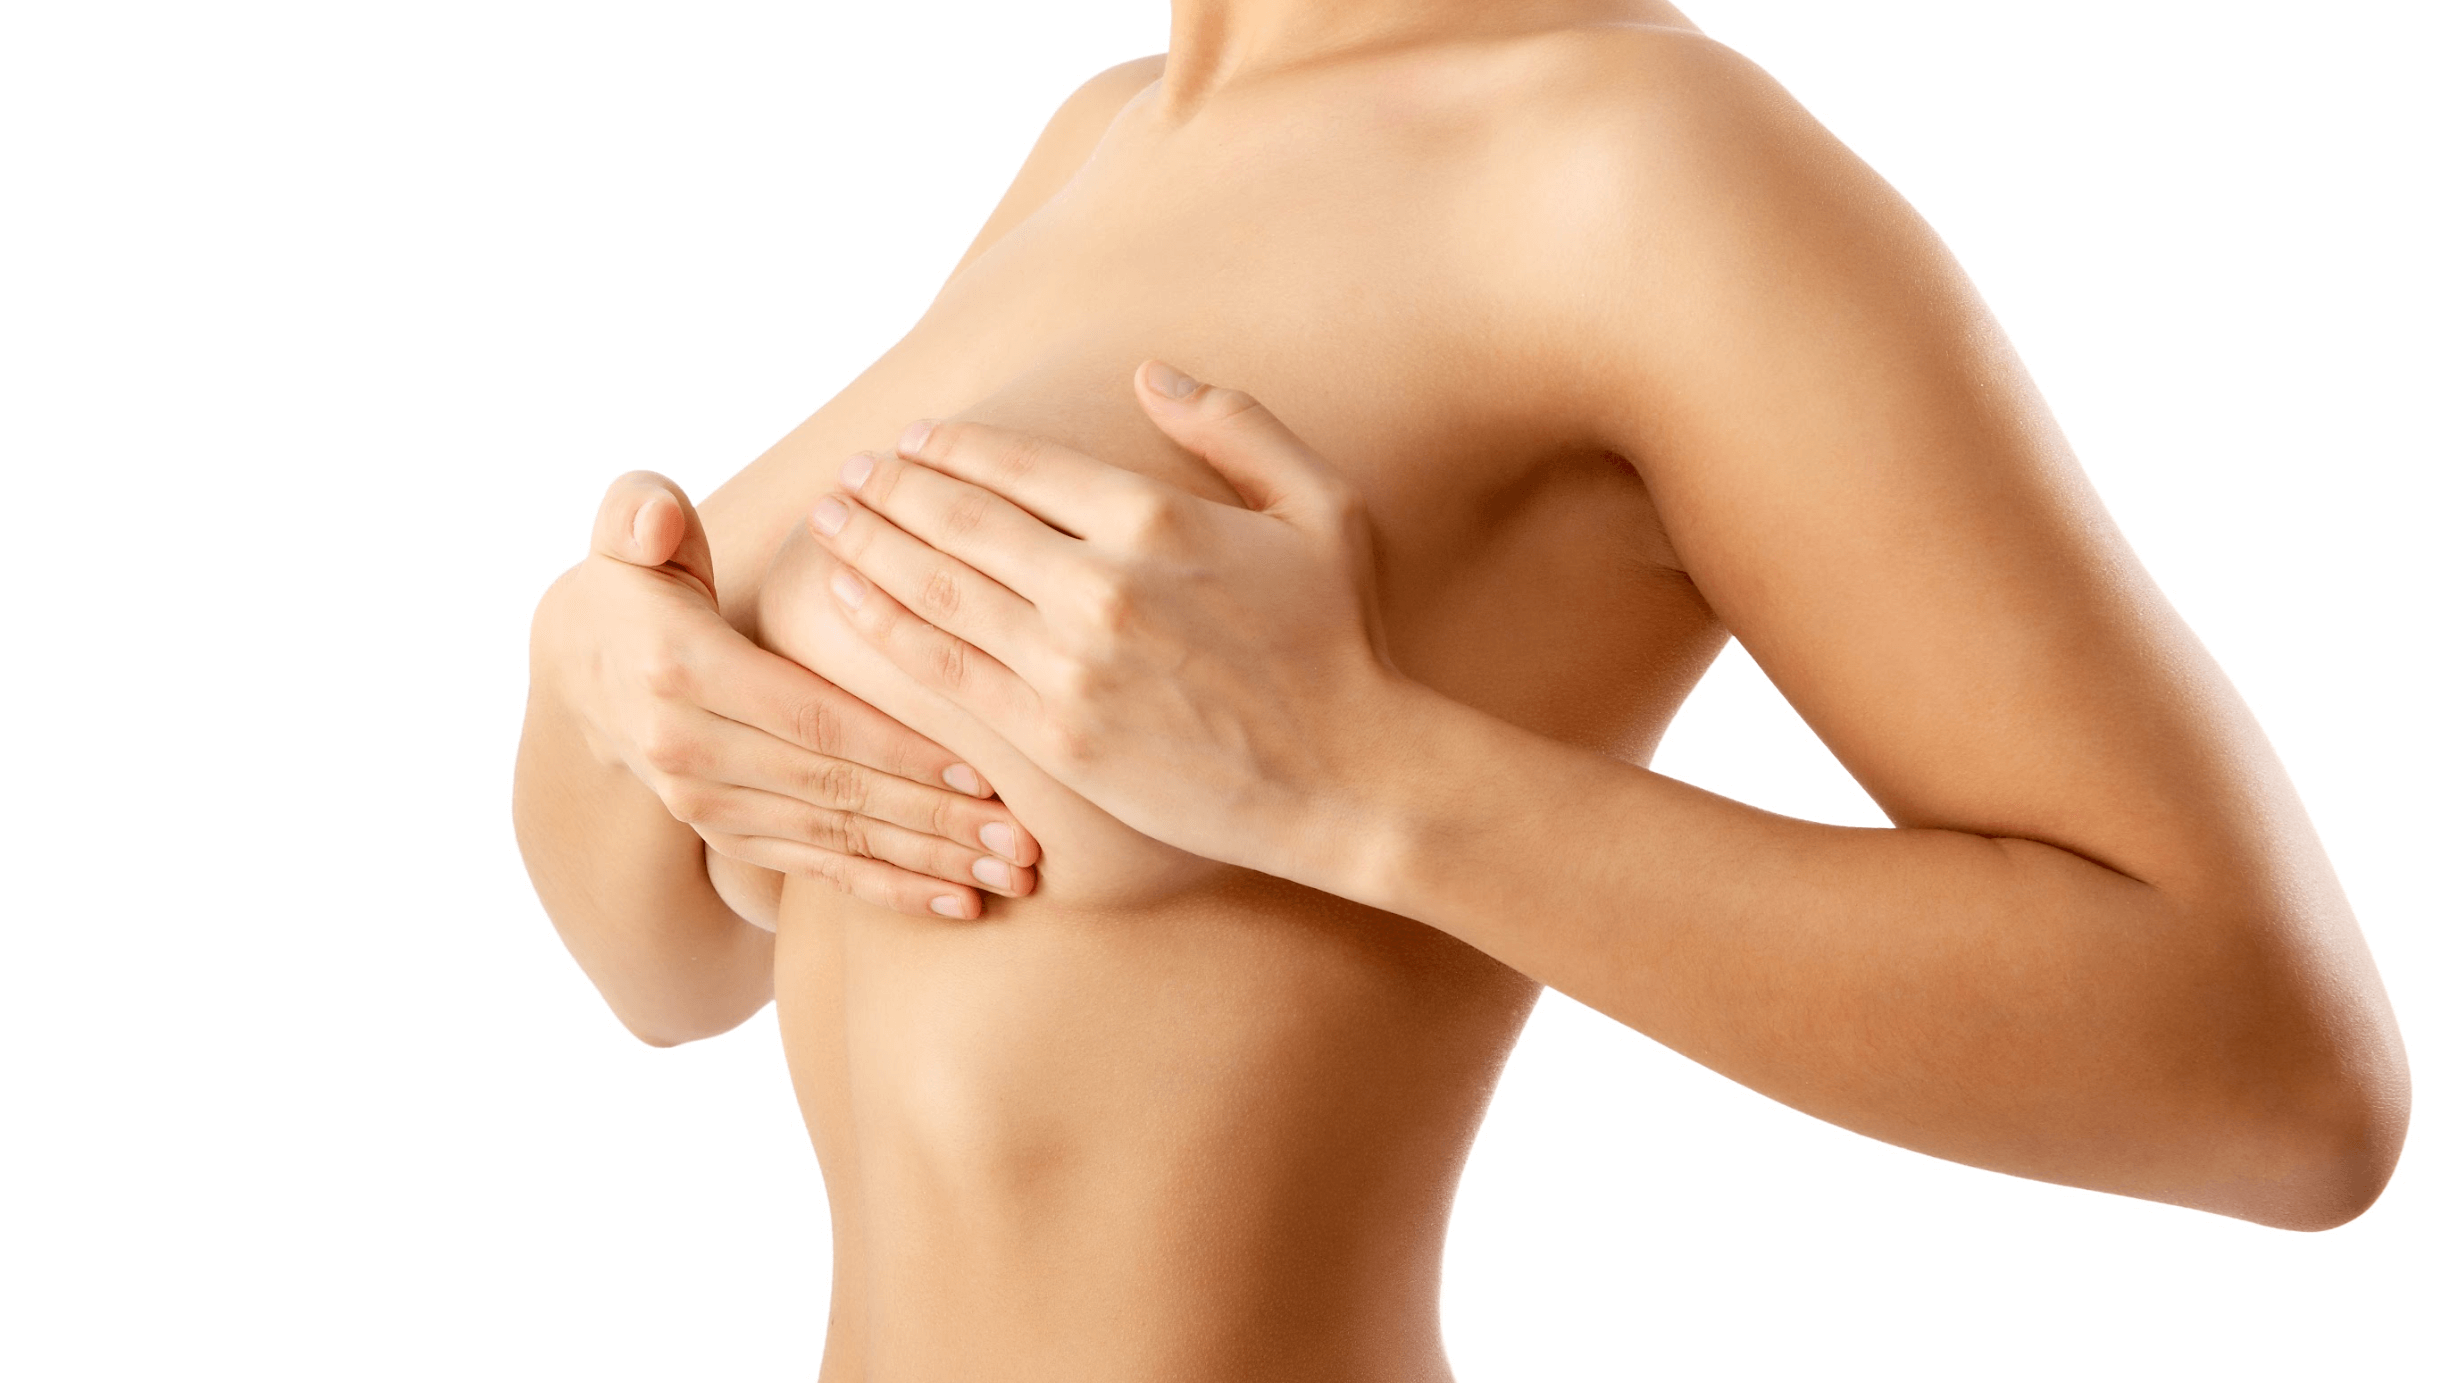 Is It Possible to Have Breast Augmentation Without Scars